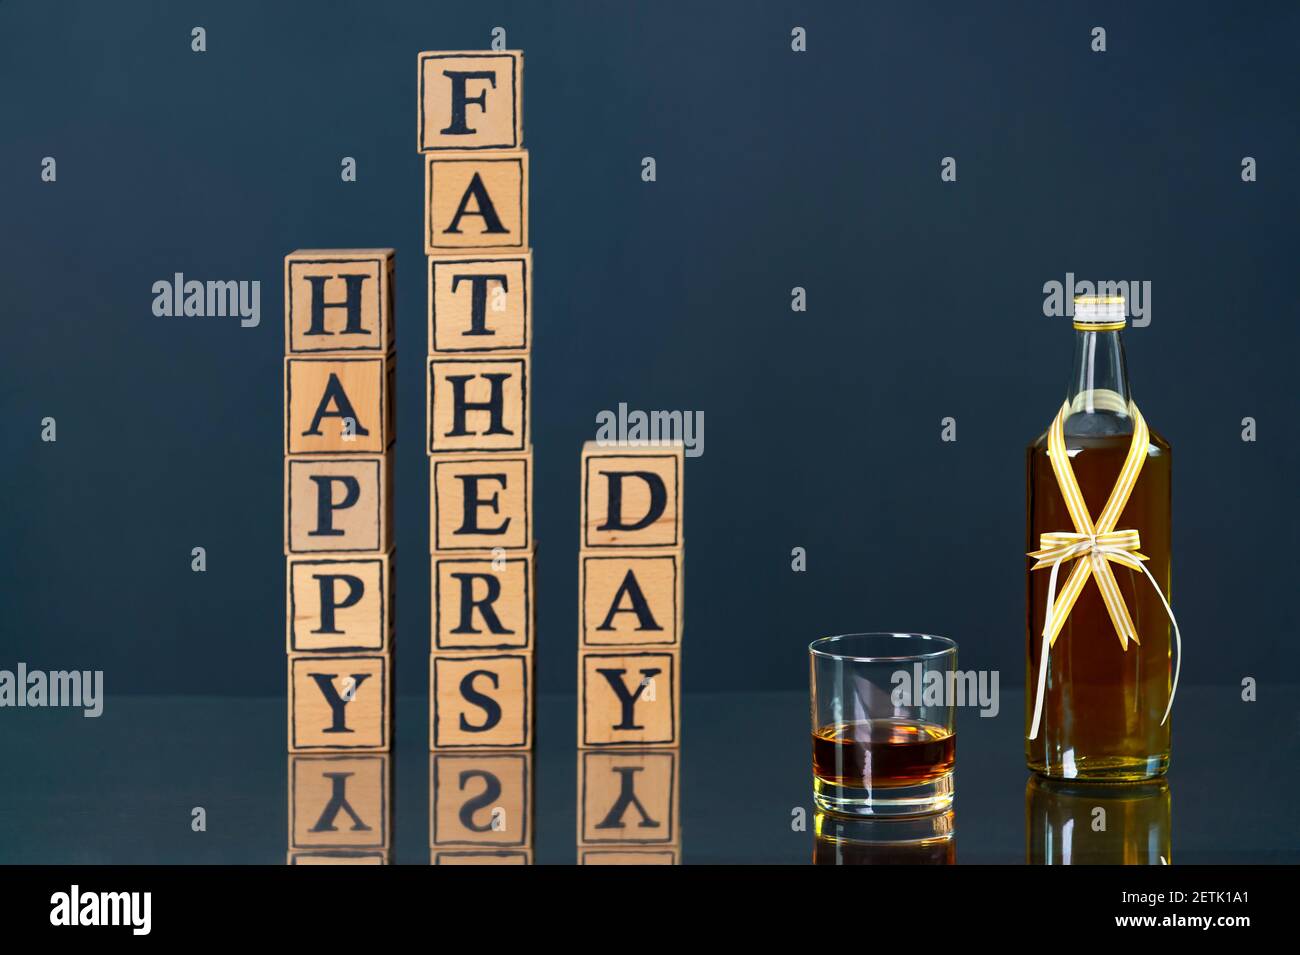 Wooden letters form English text: happy father's day. Next to it is a bottle of whiskey. Father's day gift idea. Stock Photo